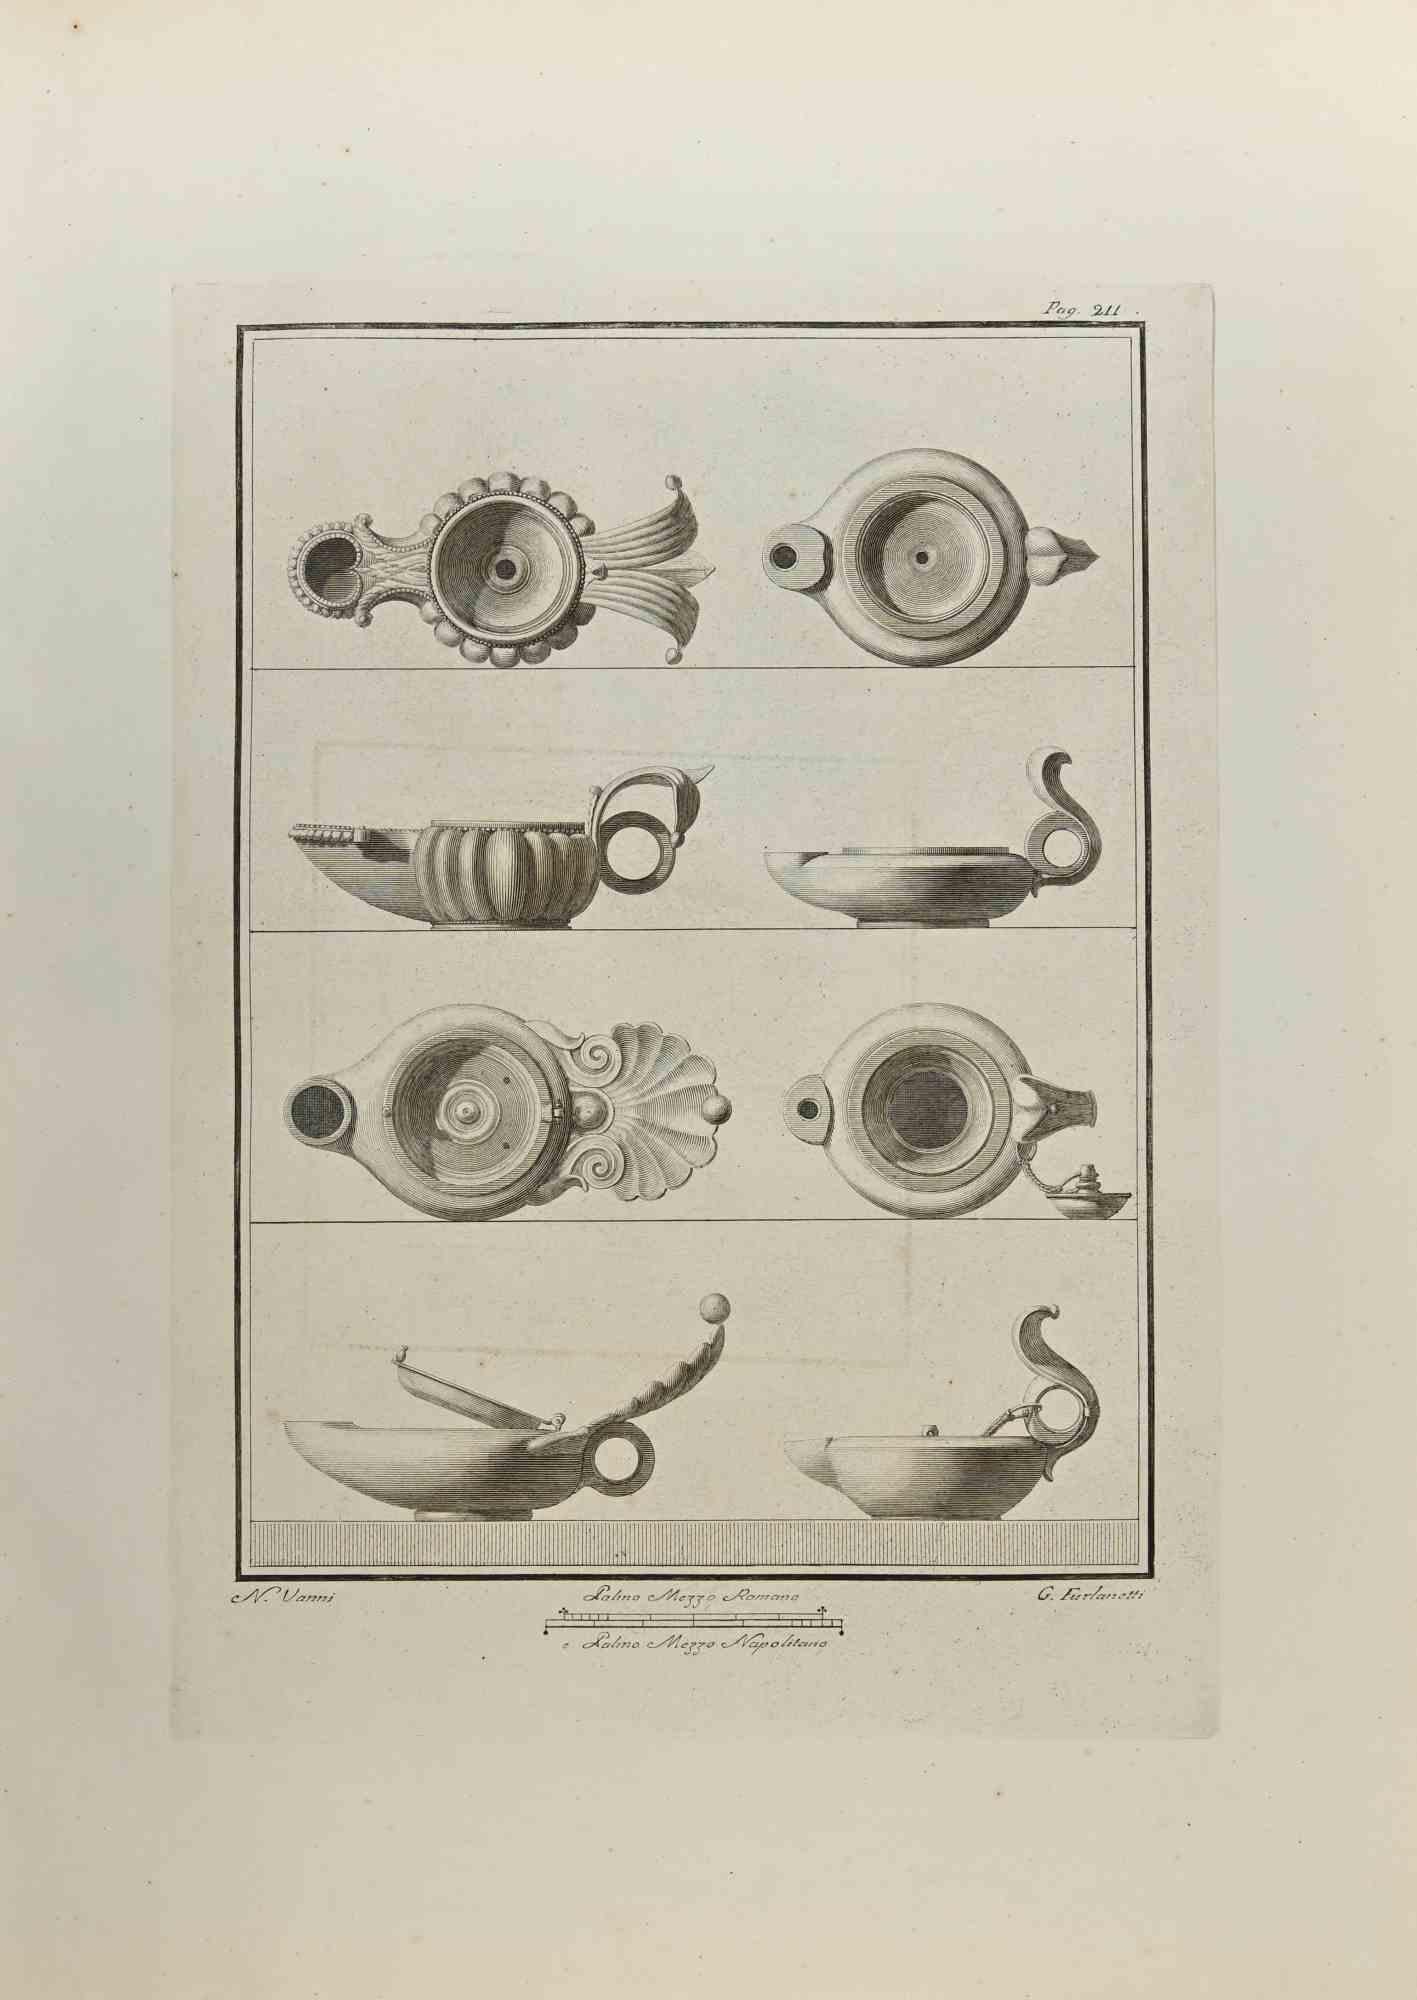 Still Life from "Antiquities of Herculaneum" is an etching on paper realized by G. Furlanetti e Nicola Vanni in the 18th Century.

Signed on the plate.

Good conditions with some folding.

The etching belongs to the print suite “Antiquities of